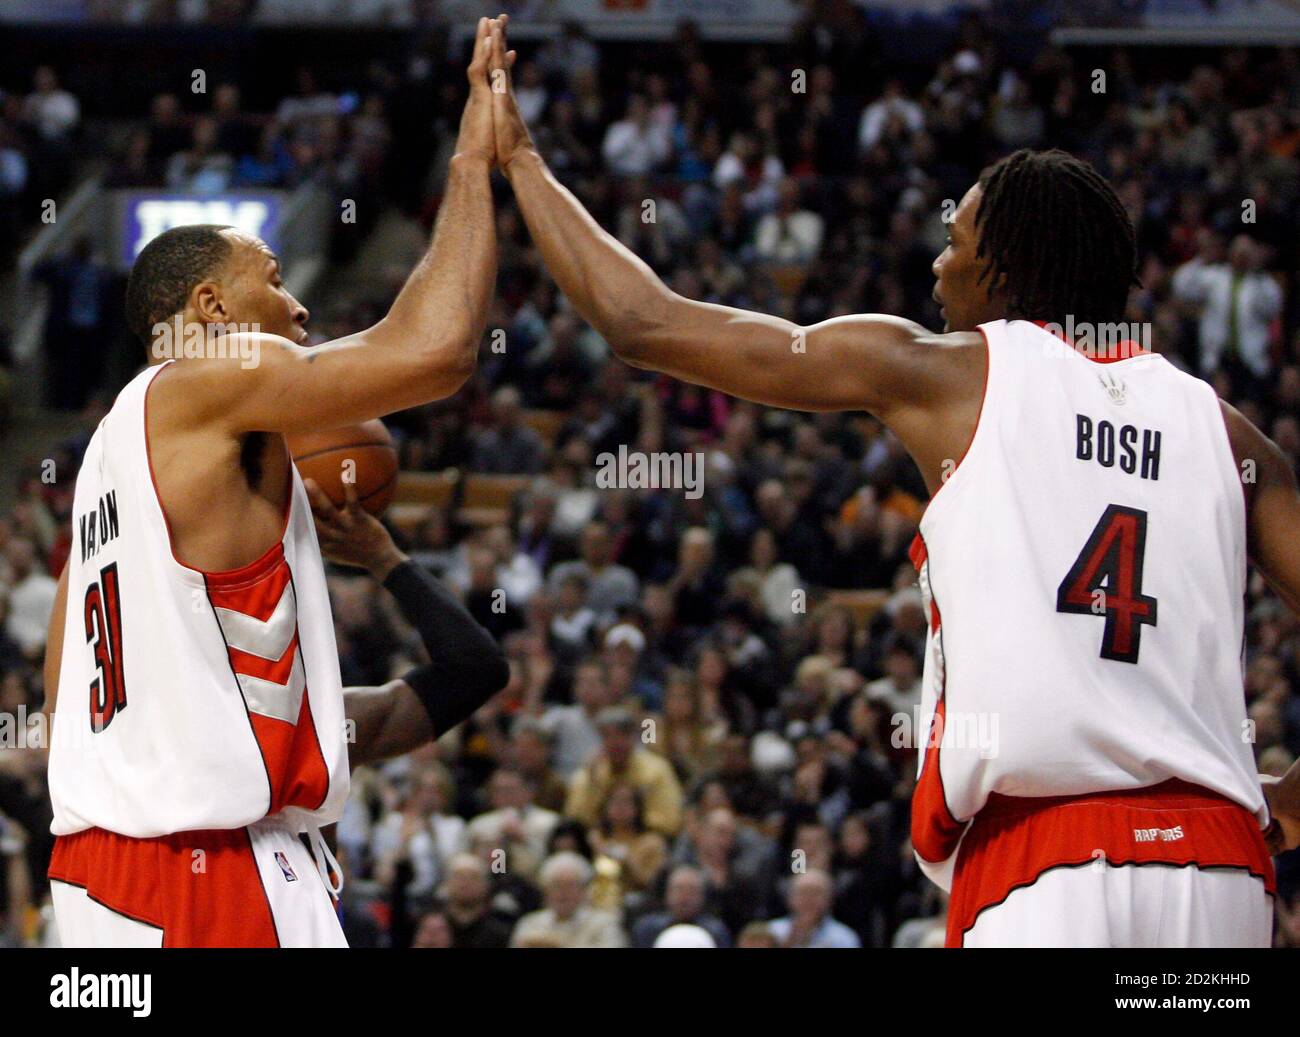 Toronto Raptors forwards Shawn Marion (L) and Chris Bosh celebrate a basket  against the New York Knicks during the second half of their NBA basketball  game in Toronto, February 22, 2009. REUTERS/Mike